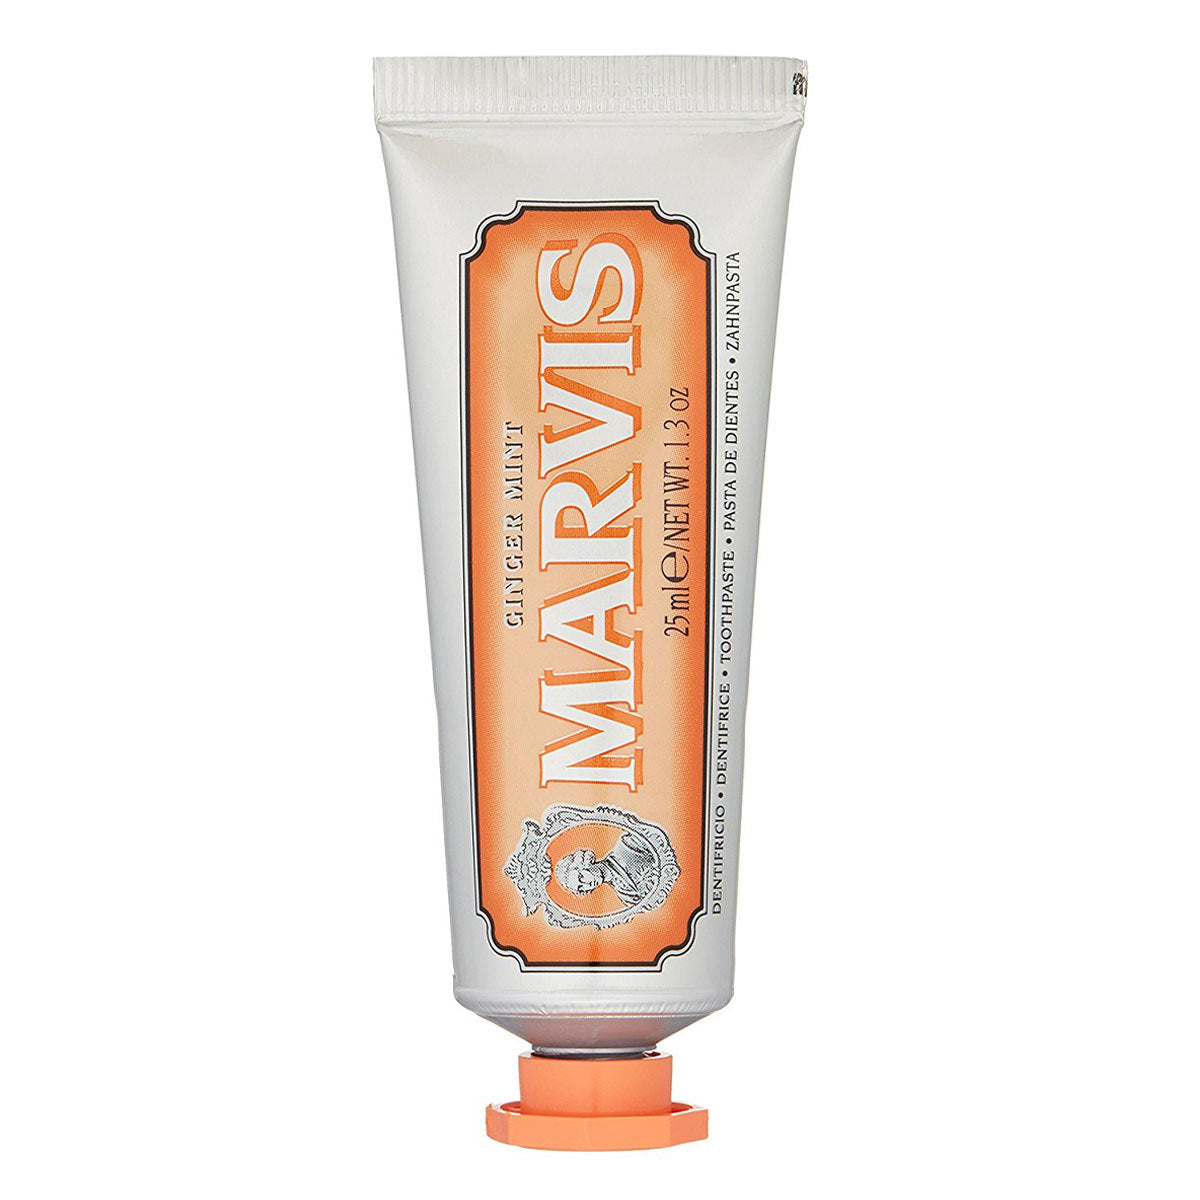 Primary image of Ginger Mint Travel Toothpaste